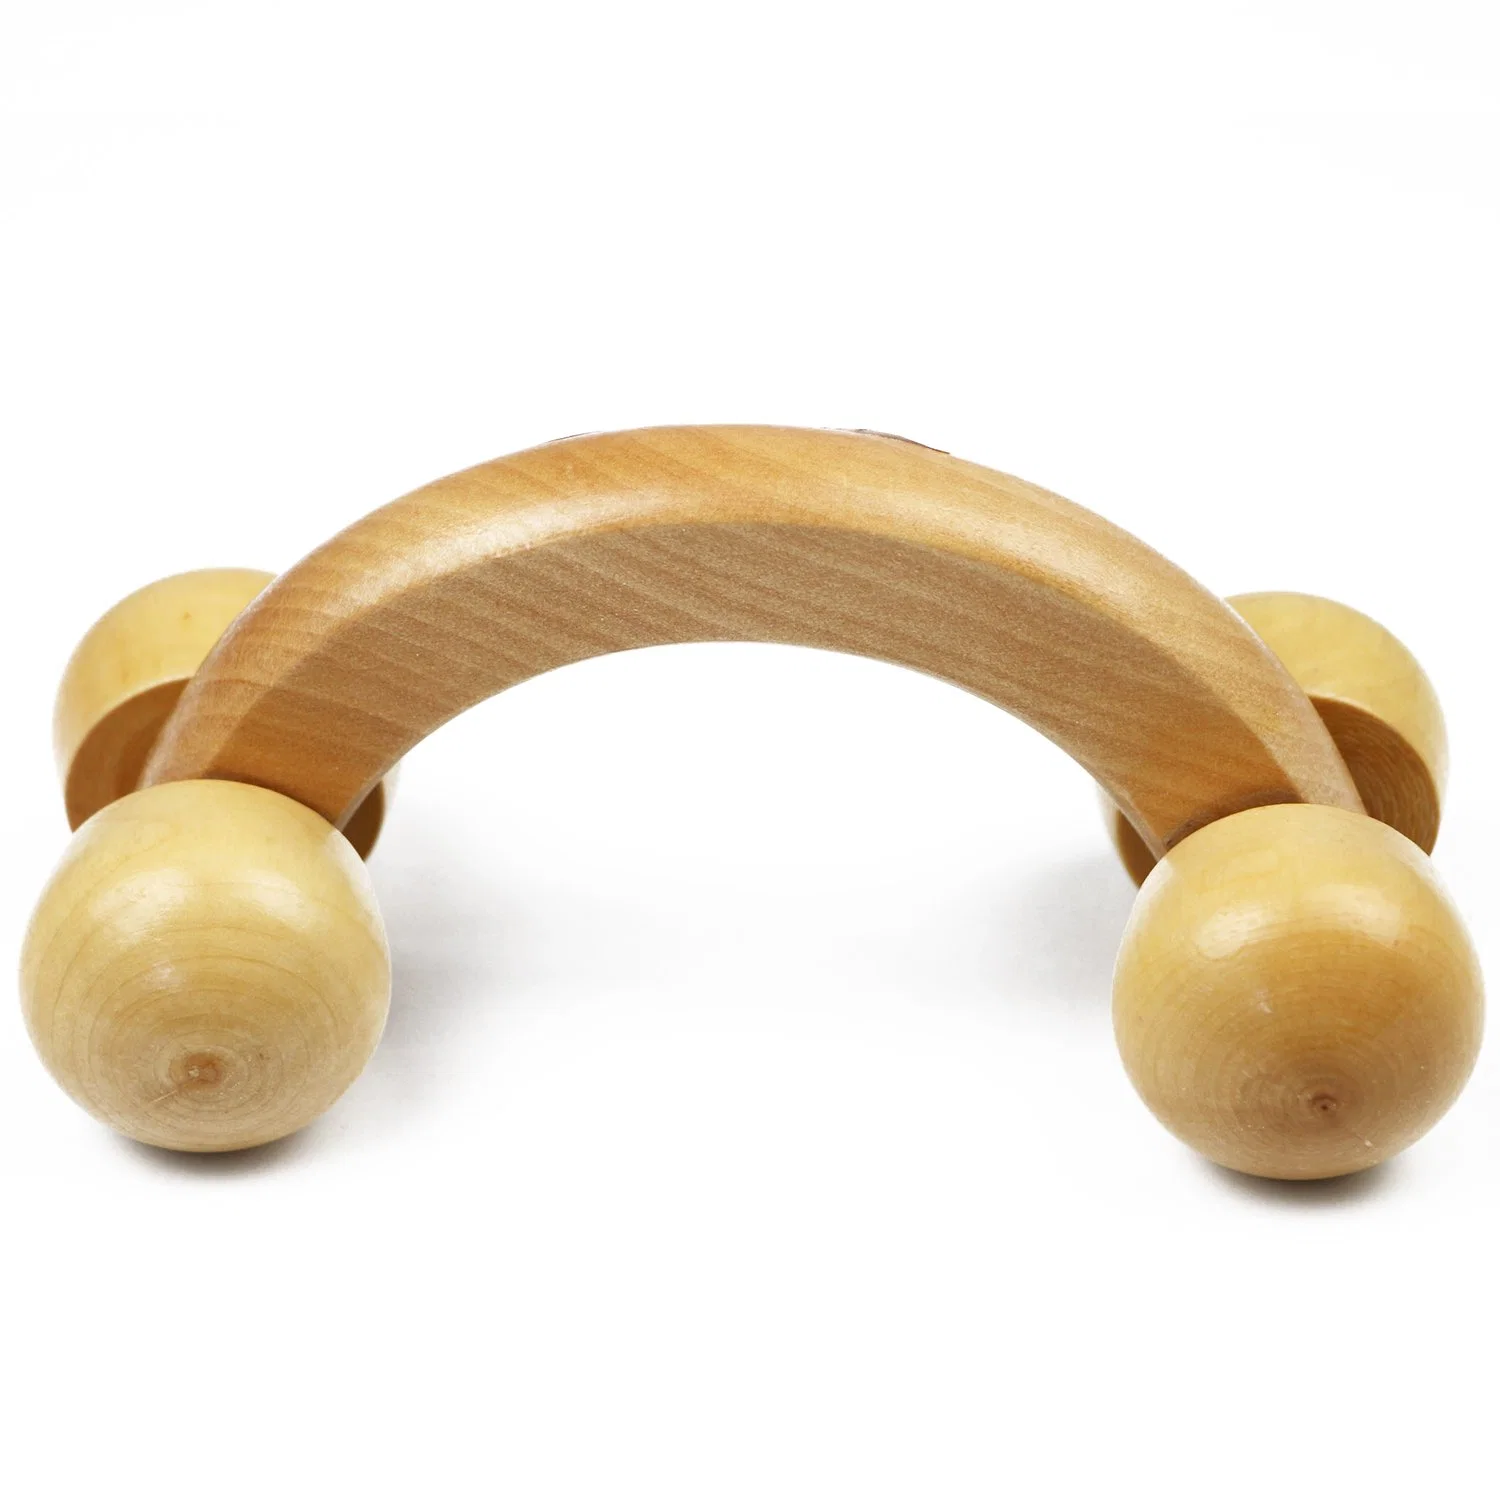 4 Ball Wooden Handheld Body Back Massage Muscle Roller Tool Massager for Neck Shoulder Arms Legs Body